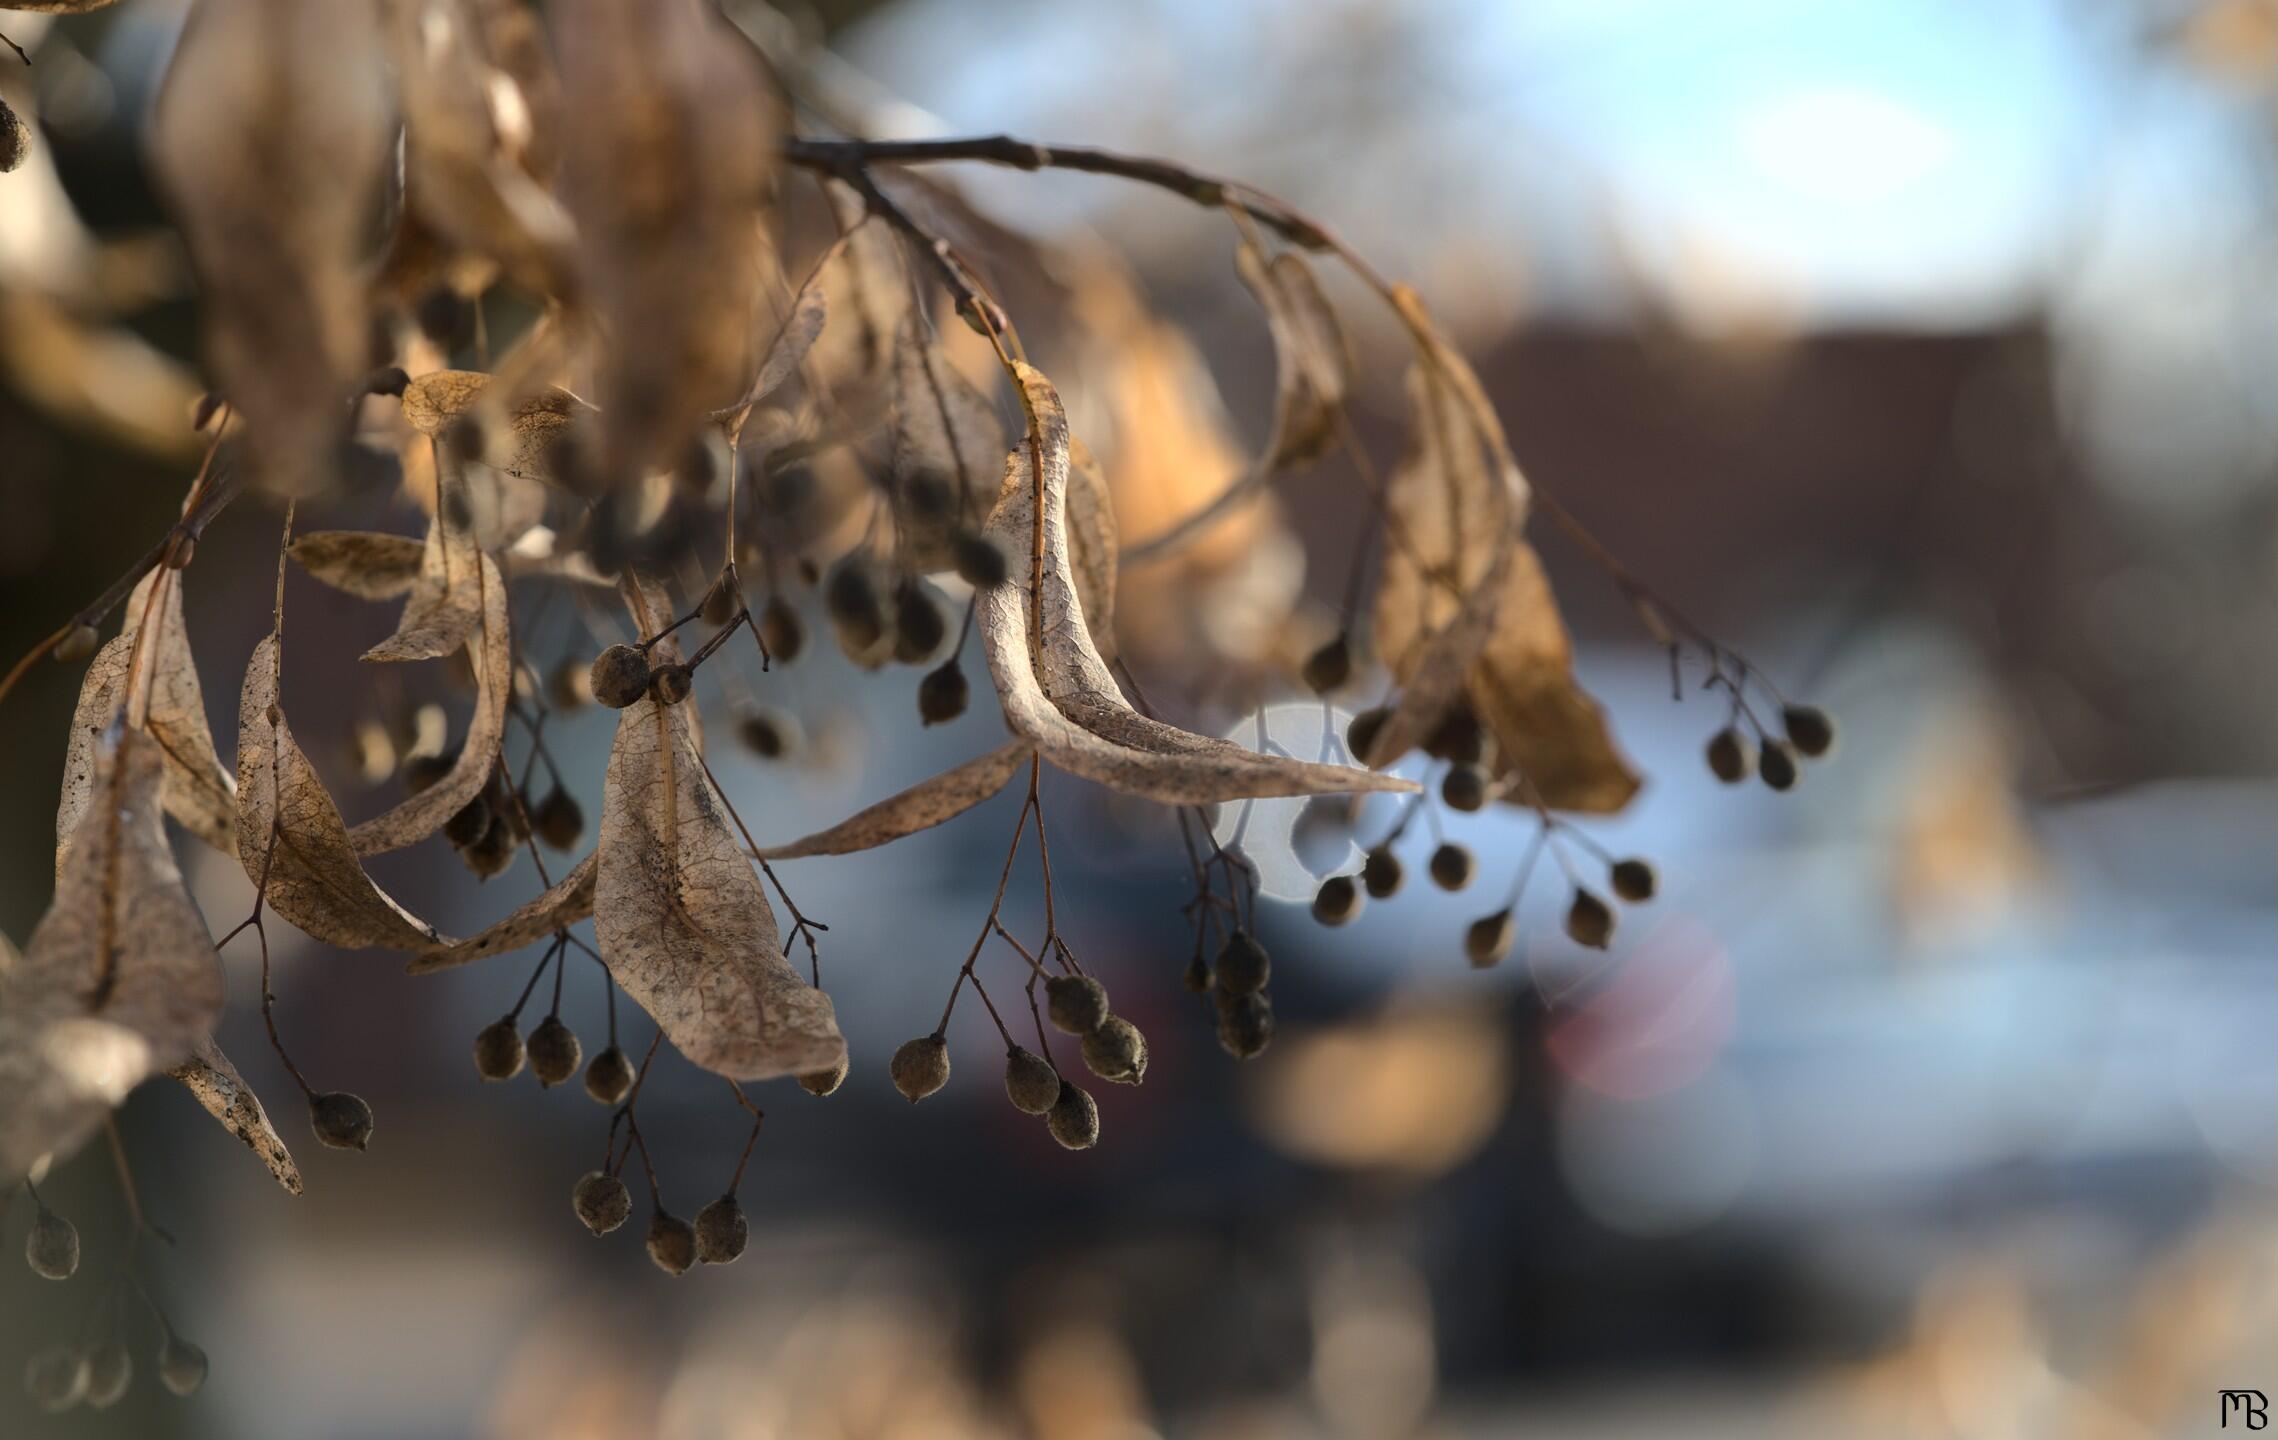 Seed pods floating in tree